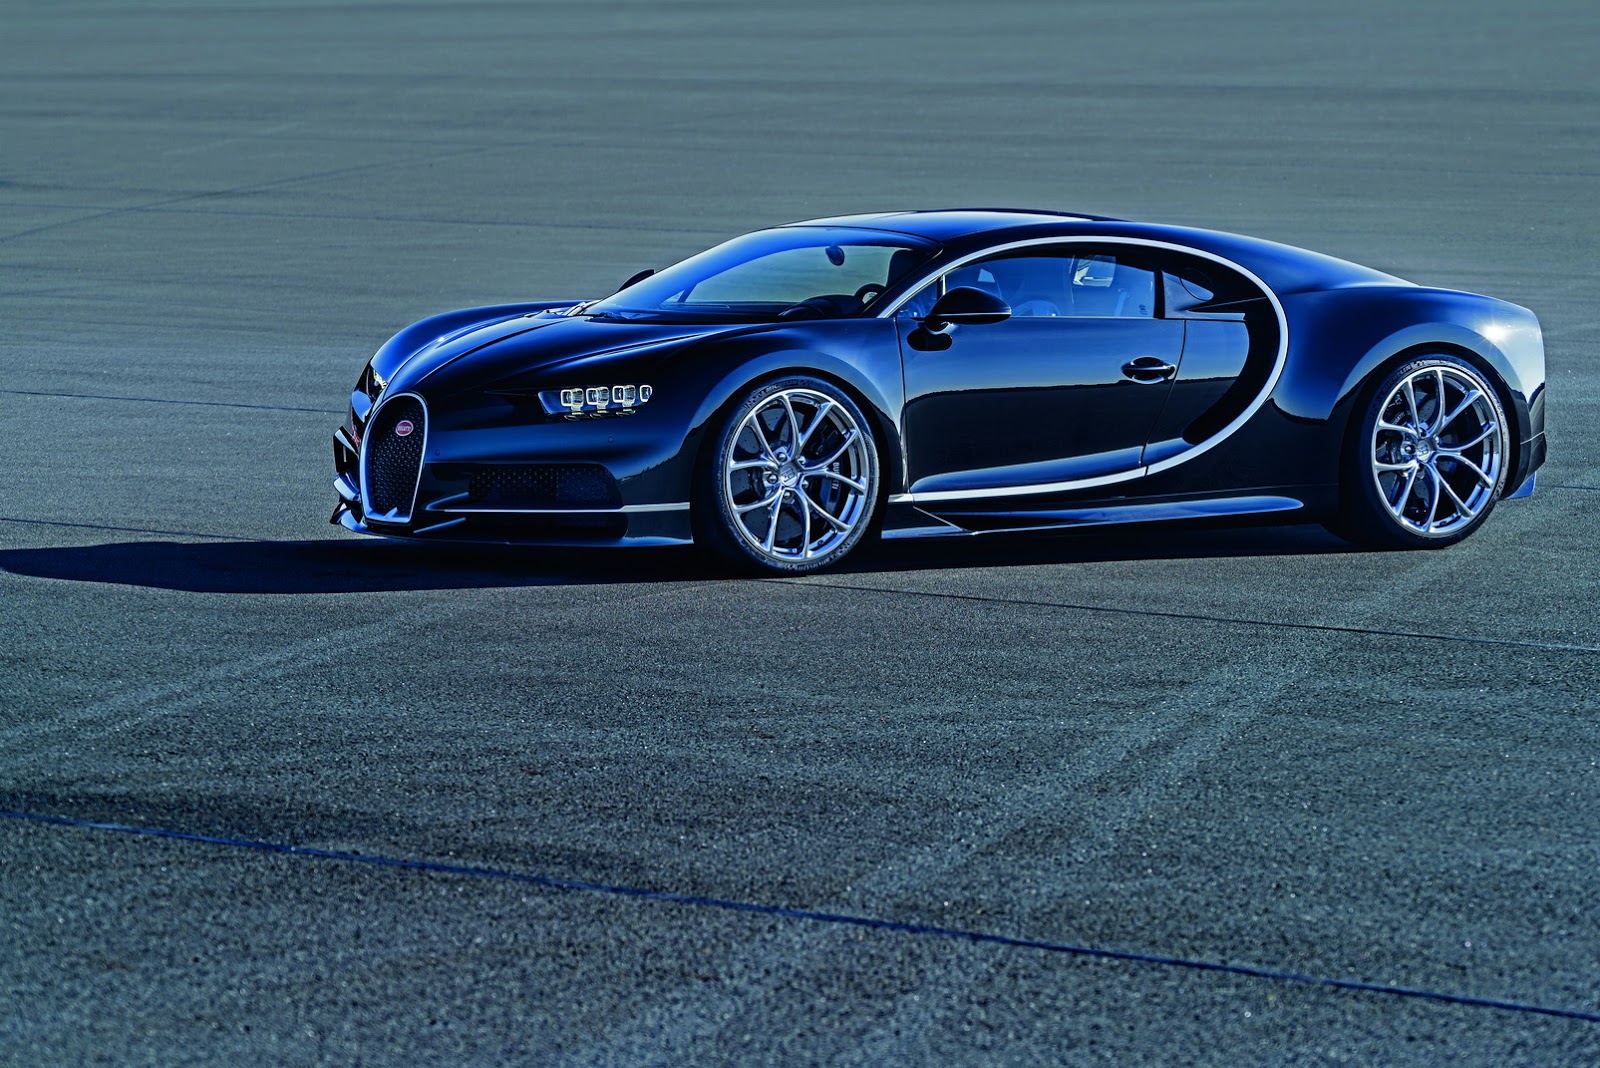 This Is The Last 1,500-HP Chiron, Bugatti Swears